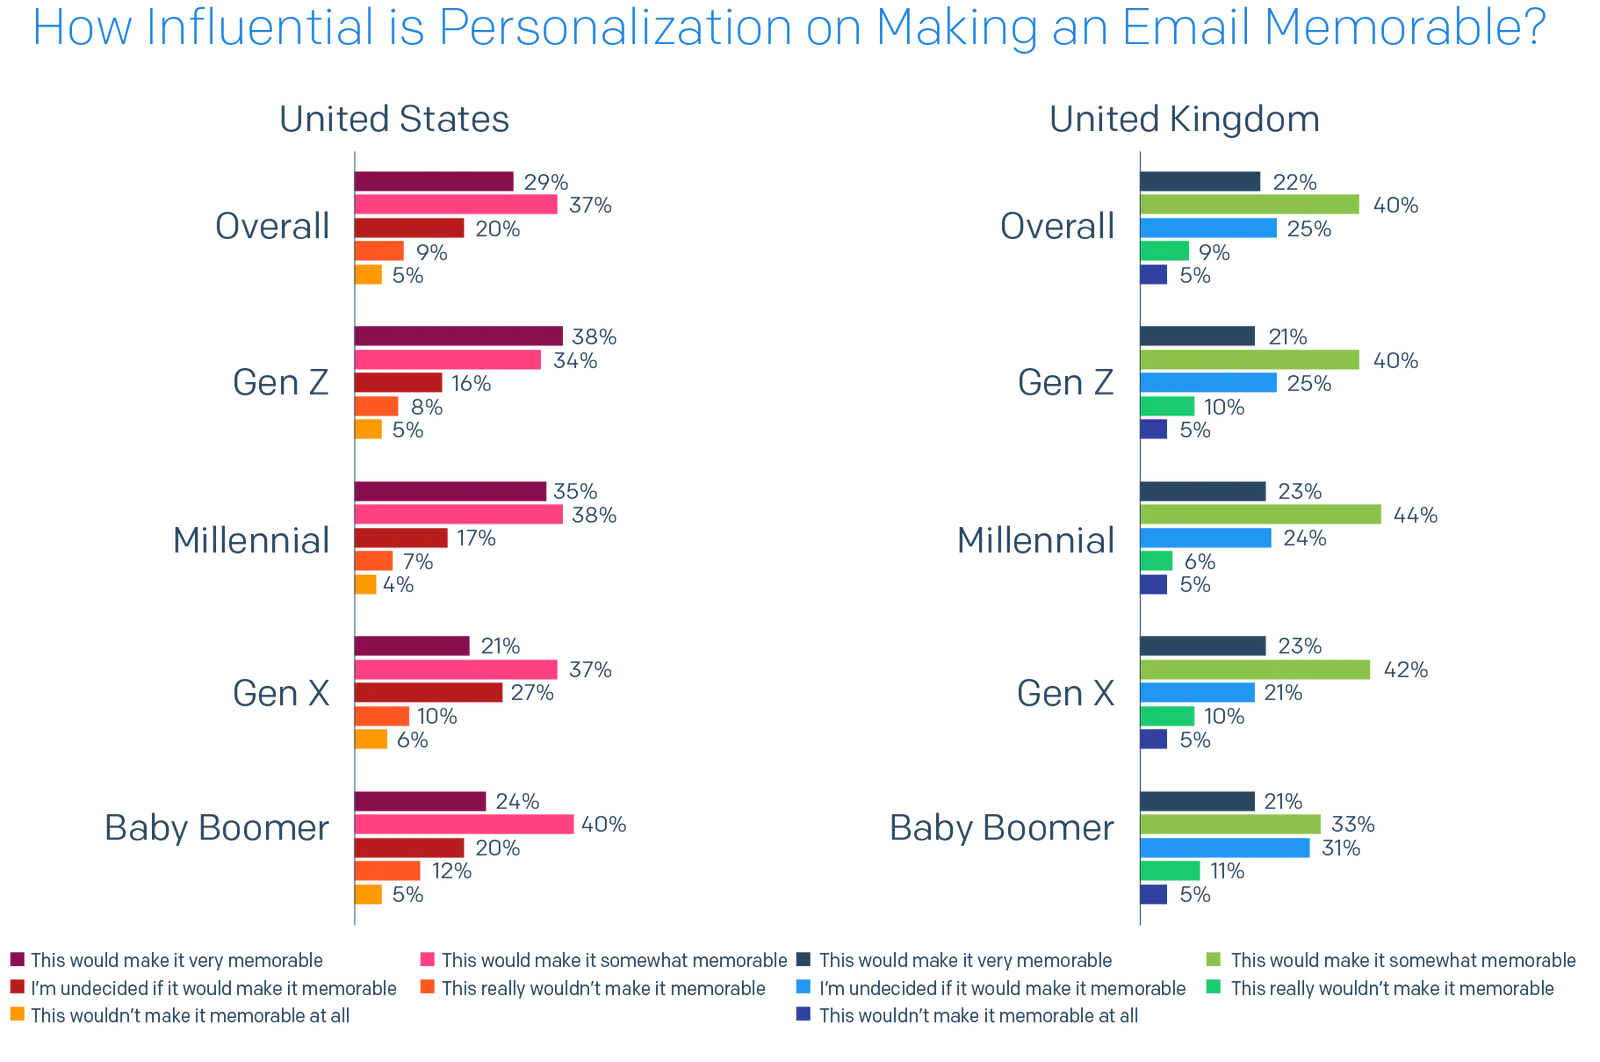 bar chart of U.S./U.K. split of How Influential is Personalization on Making an Email Memorable?